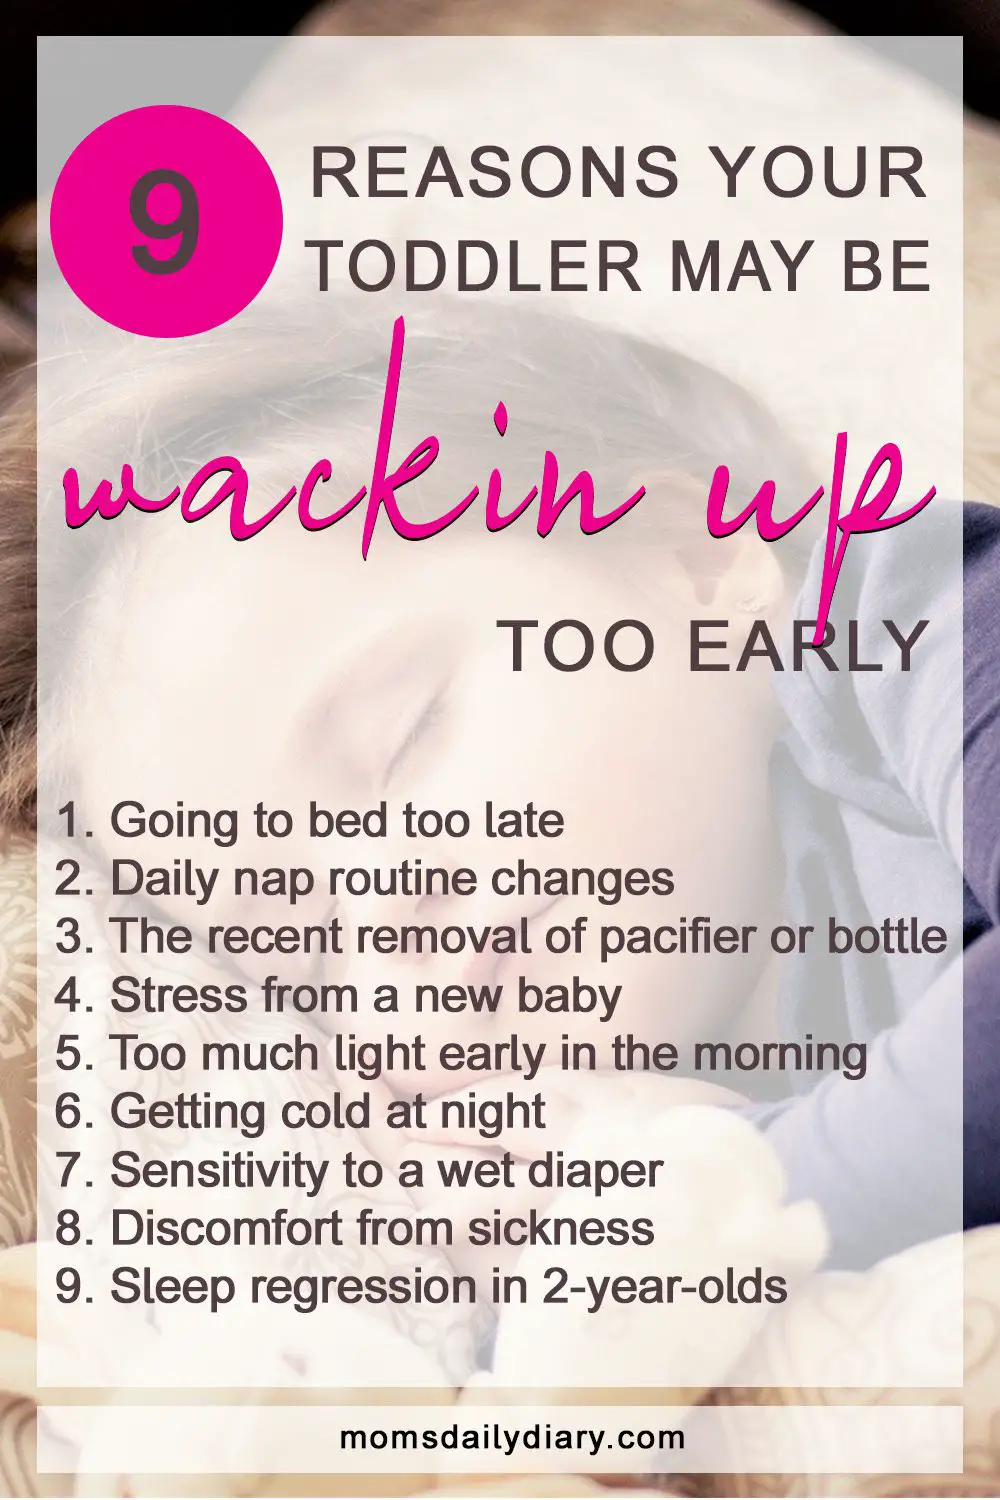 9 Reasons why your toddler may be waking up too early.